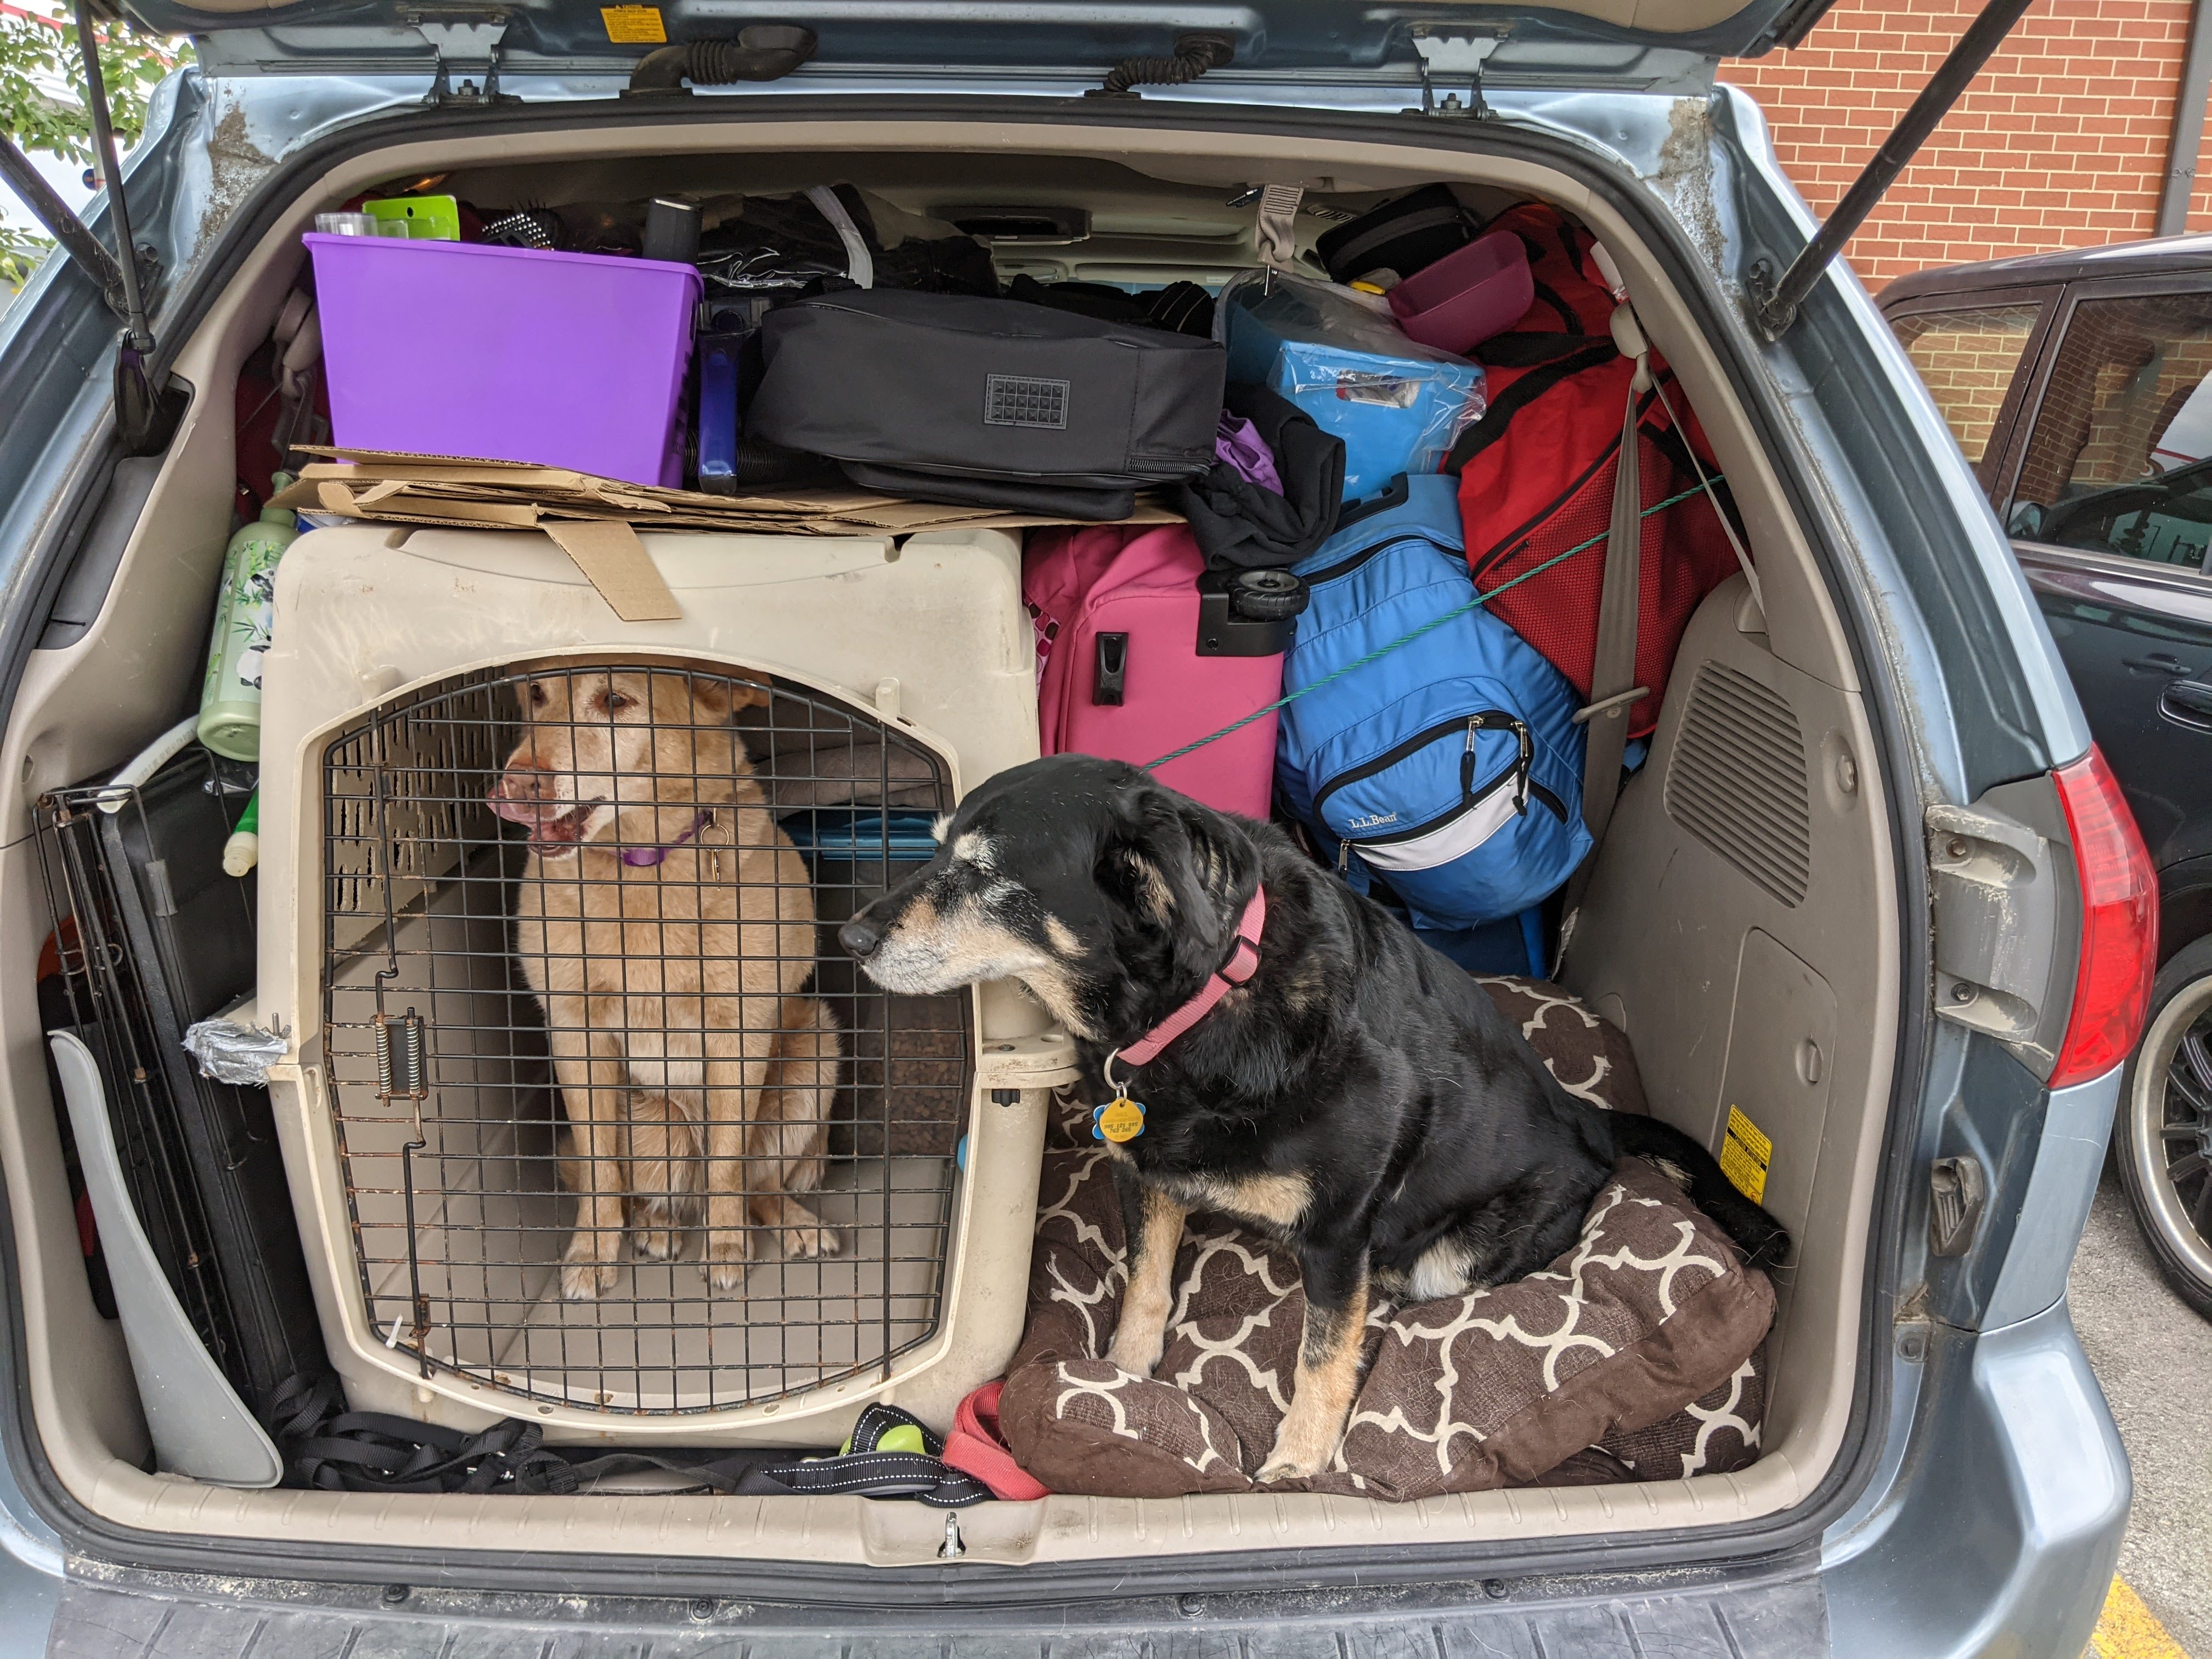 Dogs in a packed car